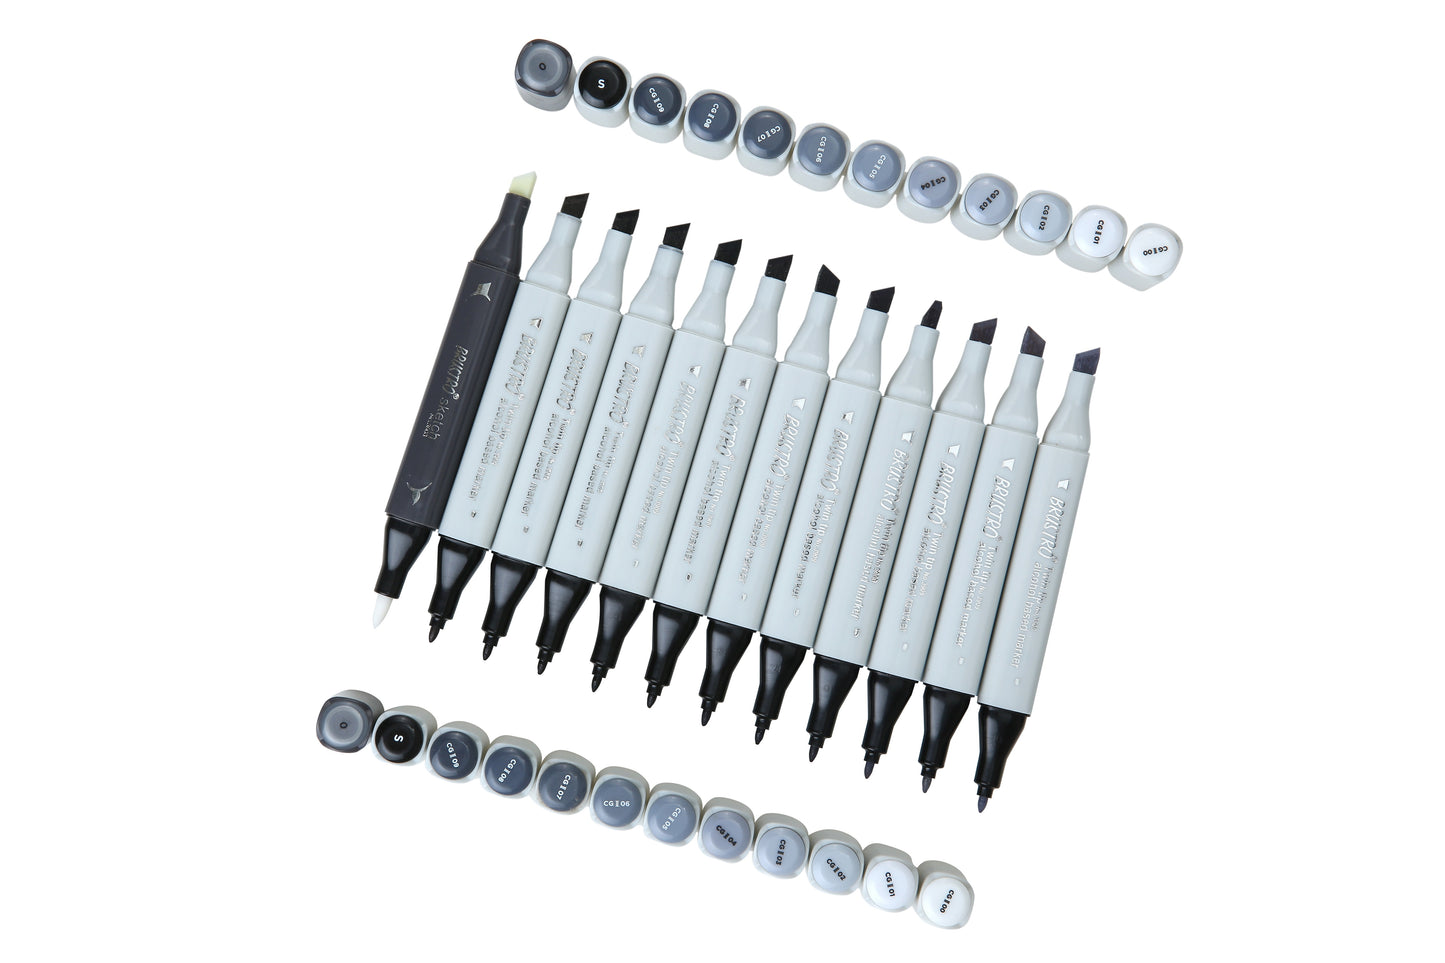 Brustro Twin Tip Alcohol Based Marker Set of 12 - Cool Greys